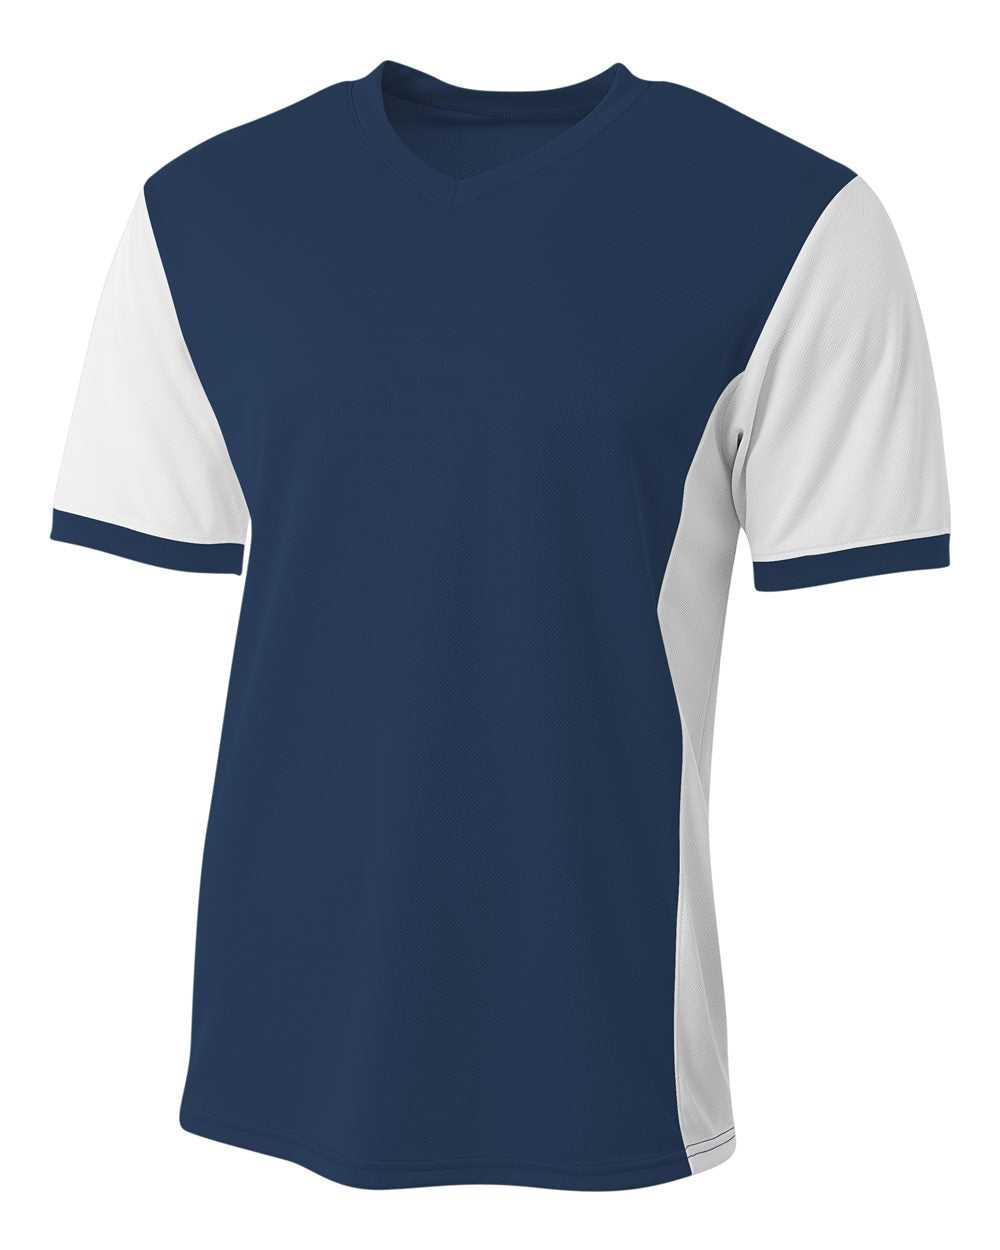 A4 N3017 Premier Soccer Jersey - Navy White - HIT a Double